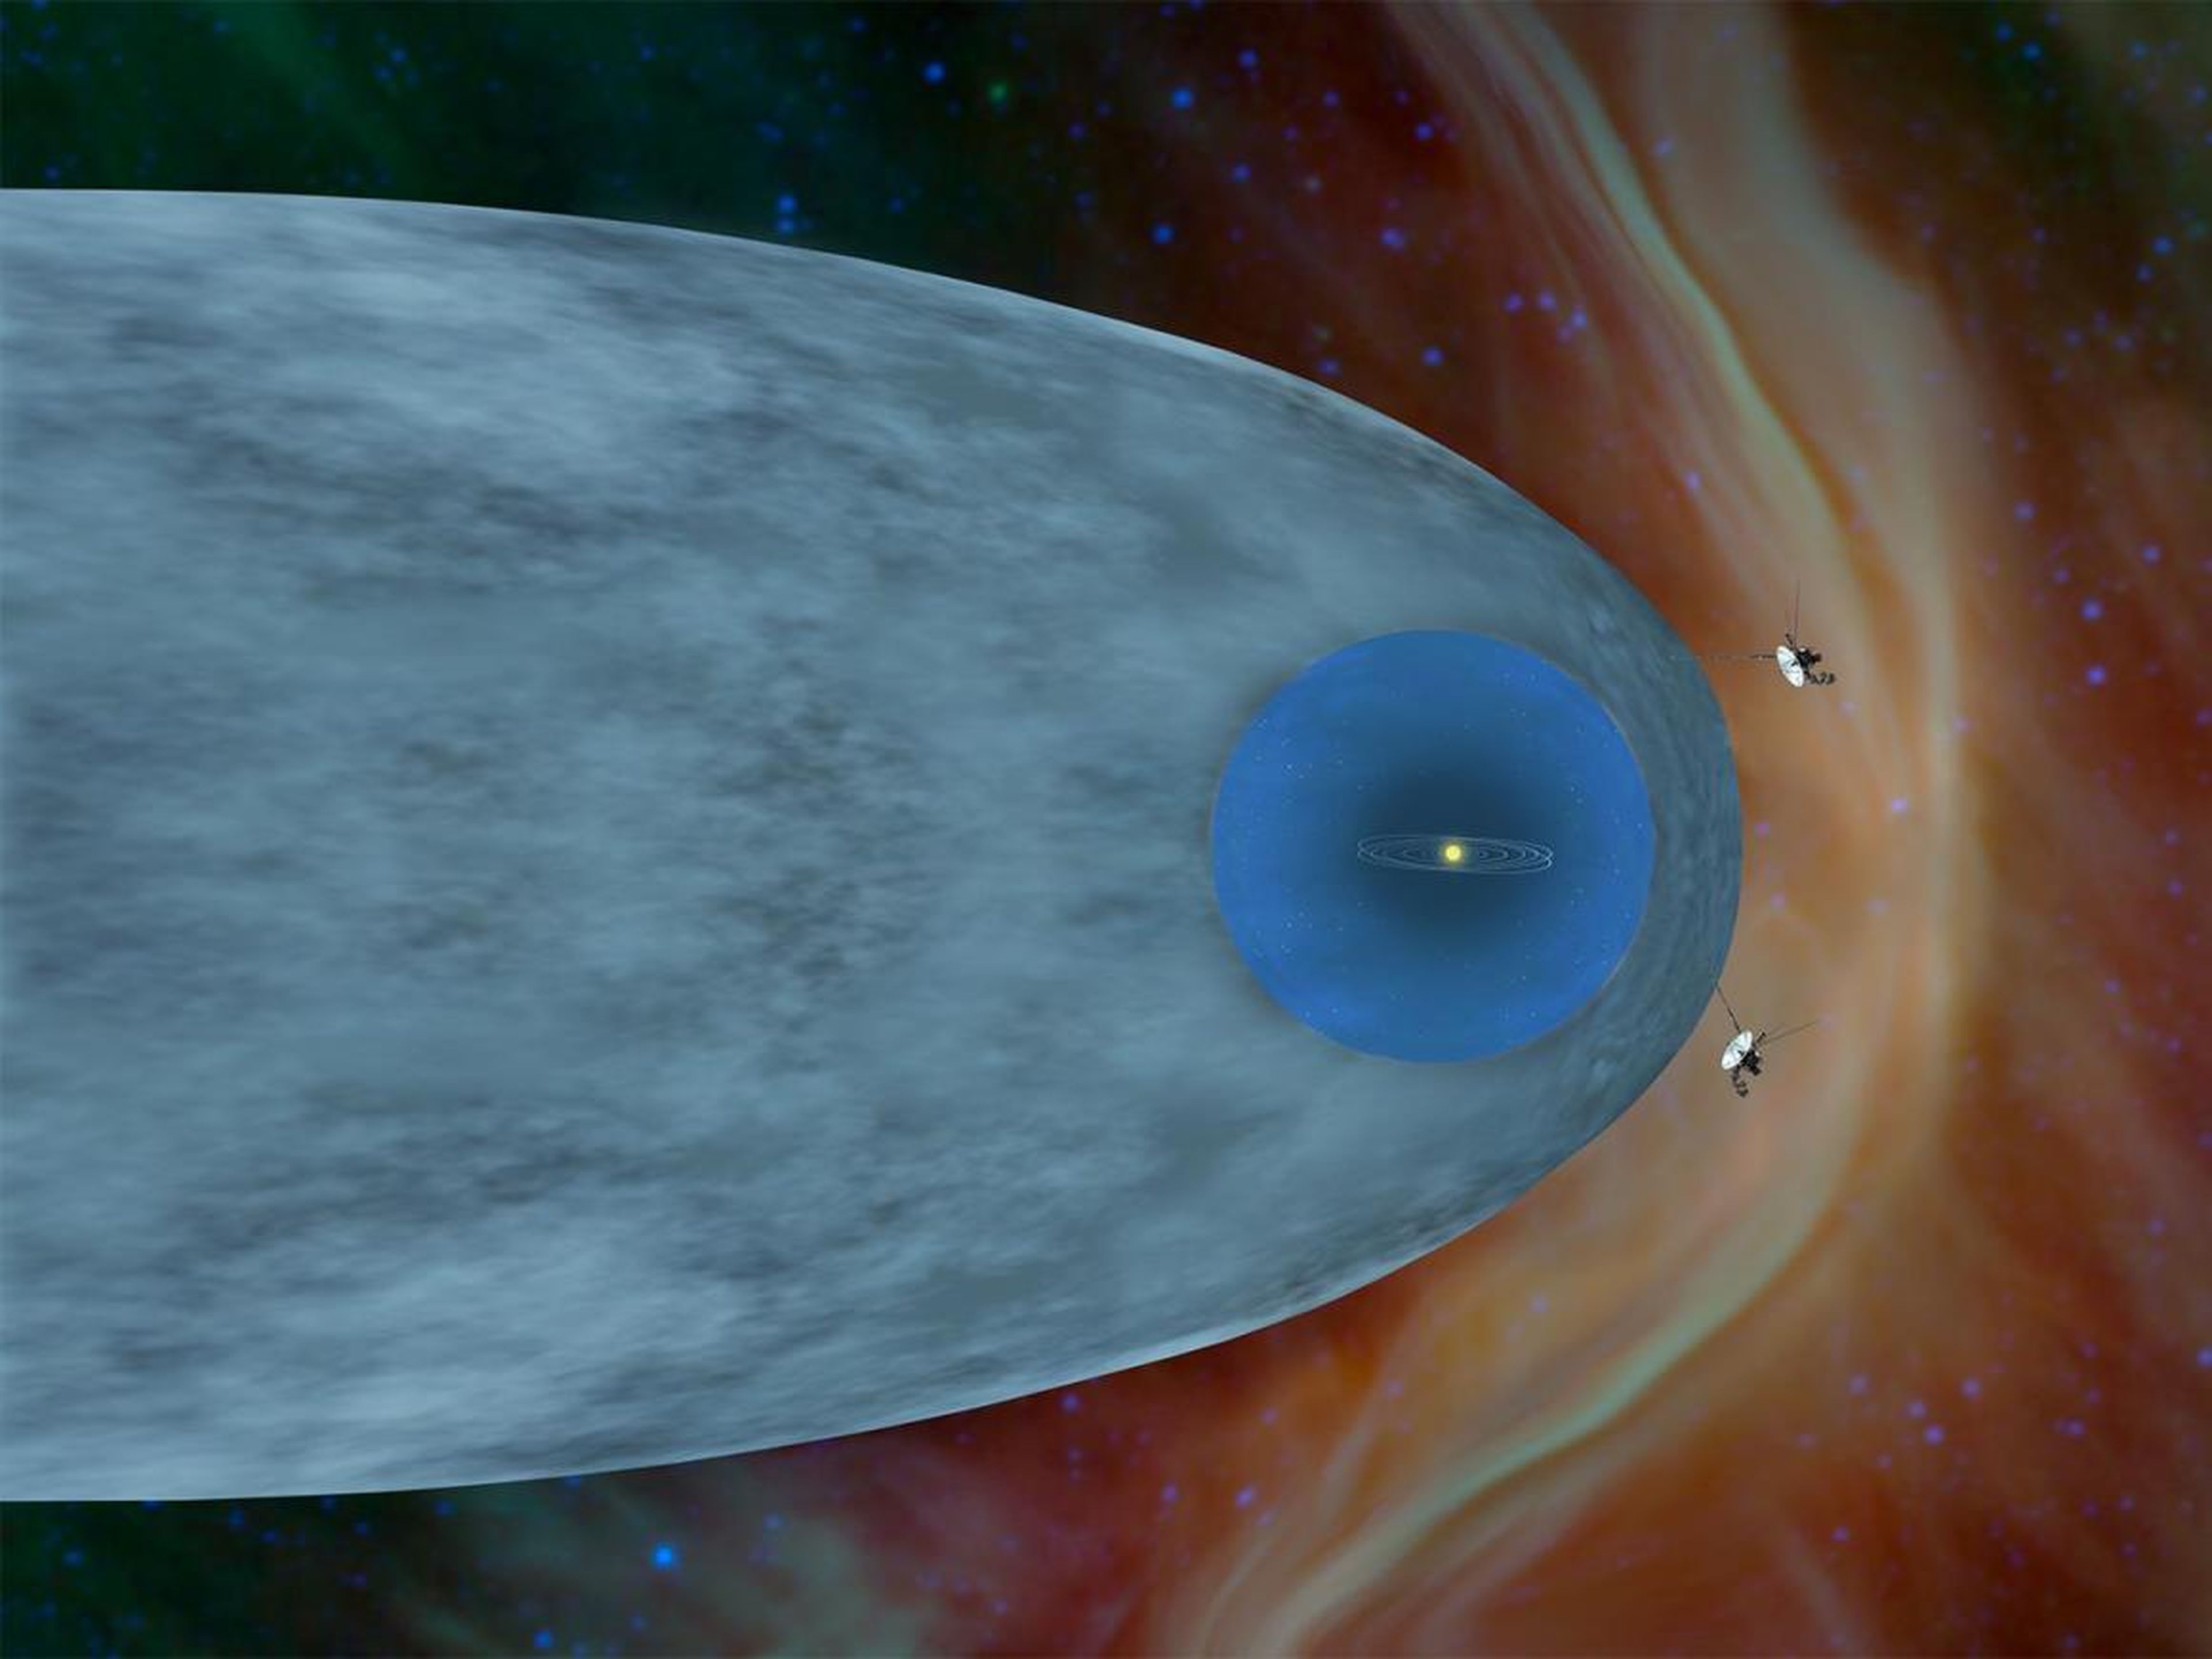 An illustration shows the position of NASA's Voyager 1 and Voyager 2 probes outside the heliosphere, a protective bubble created by the sun that extends well past the orbit of Pluto.